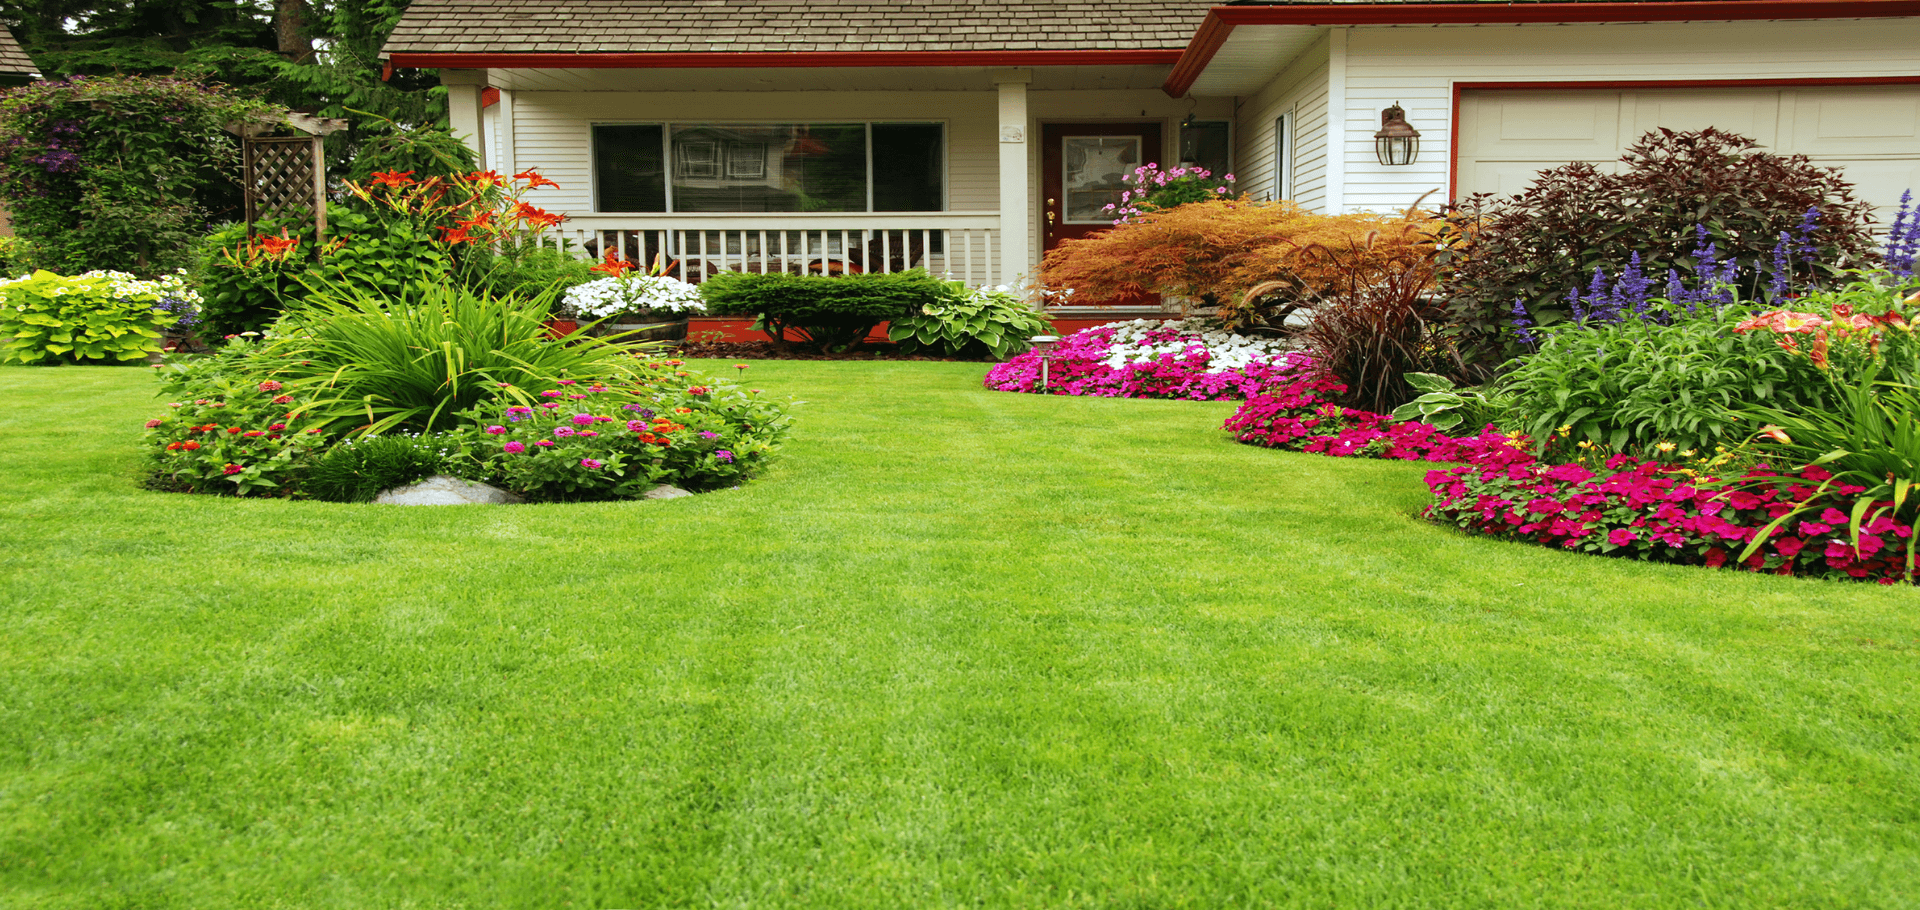 Tips for caring for your yard all year round